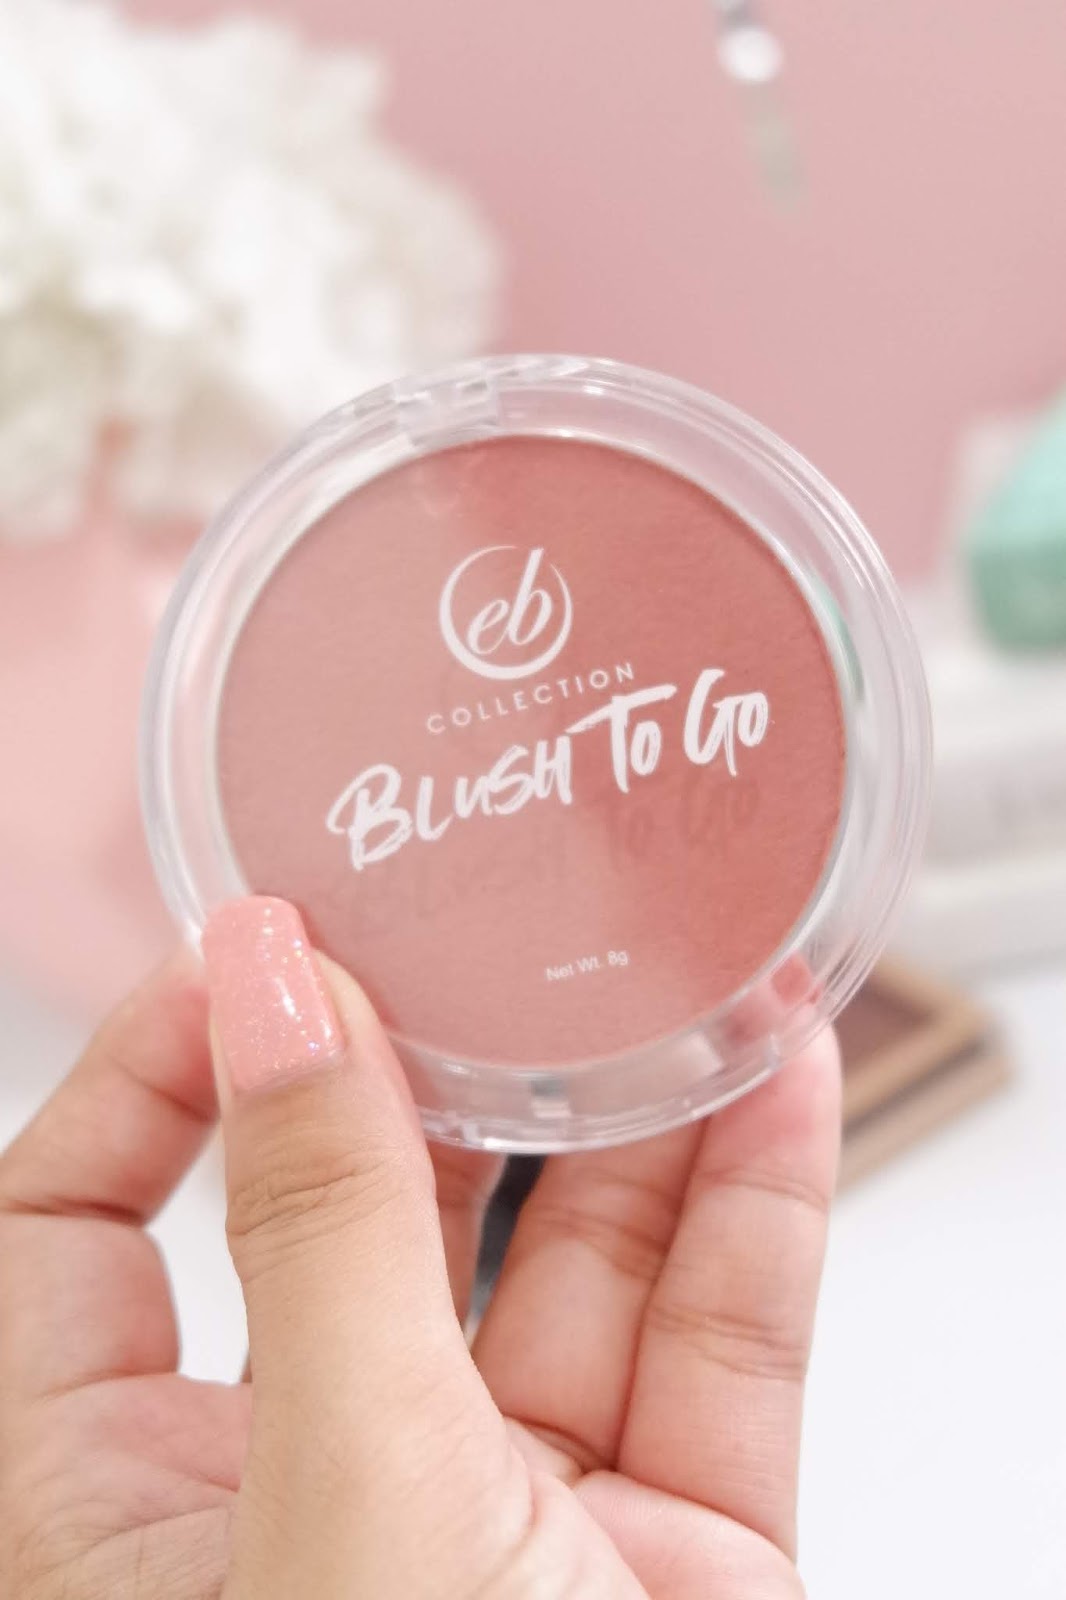 EB COLLECTION  BLUSH TO GO